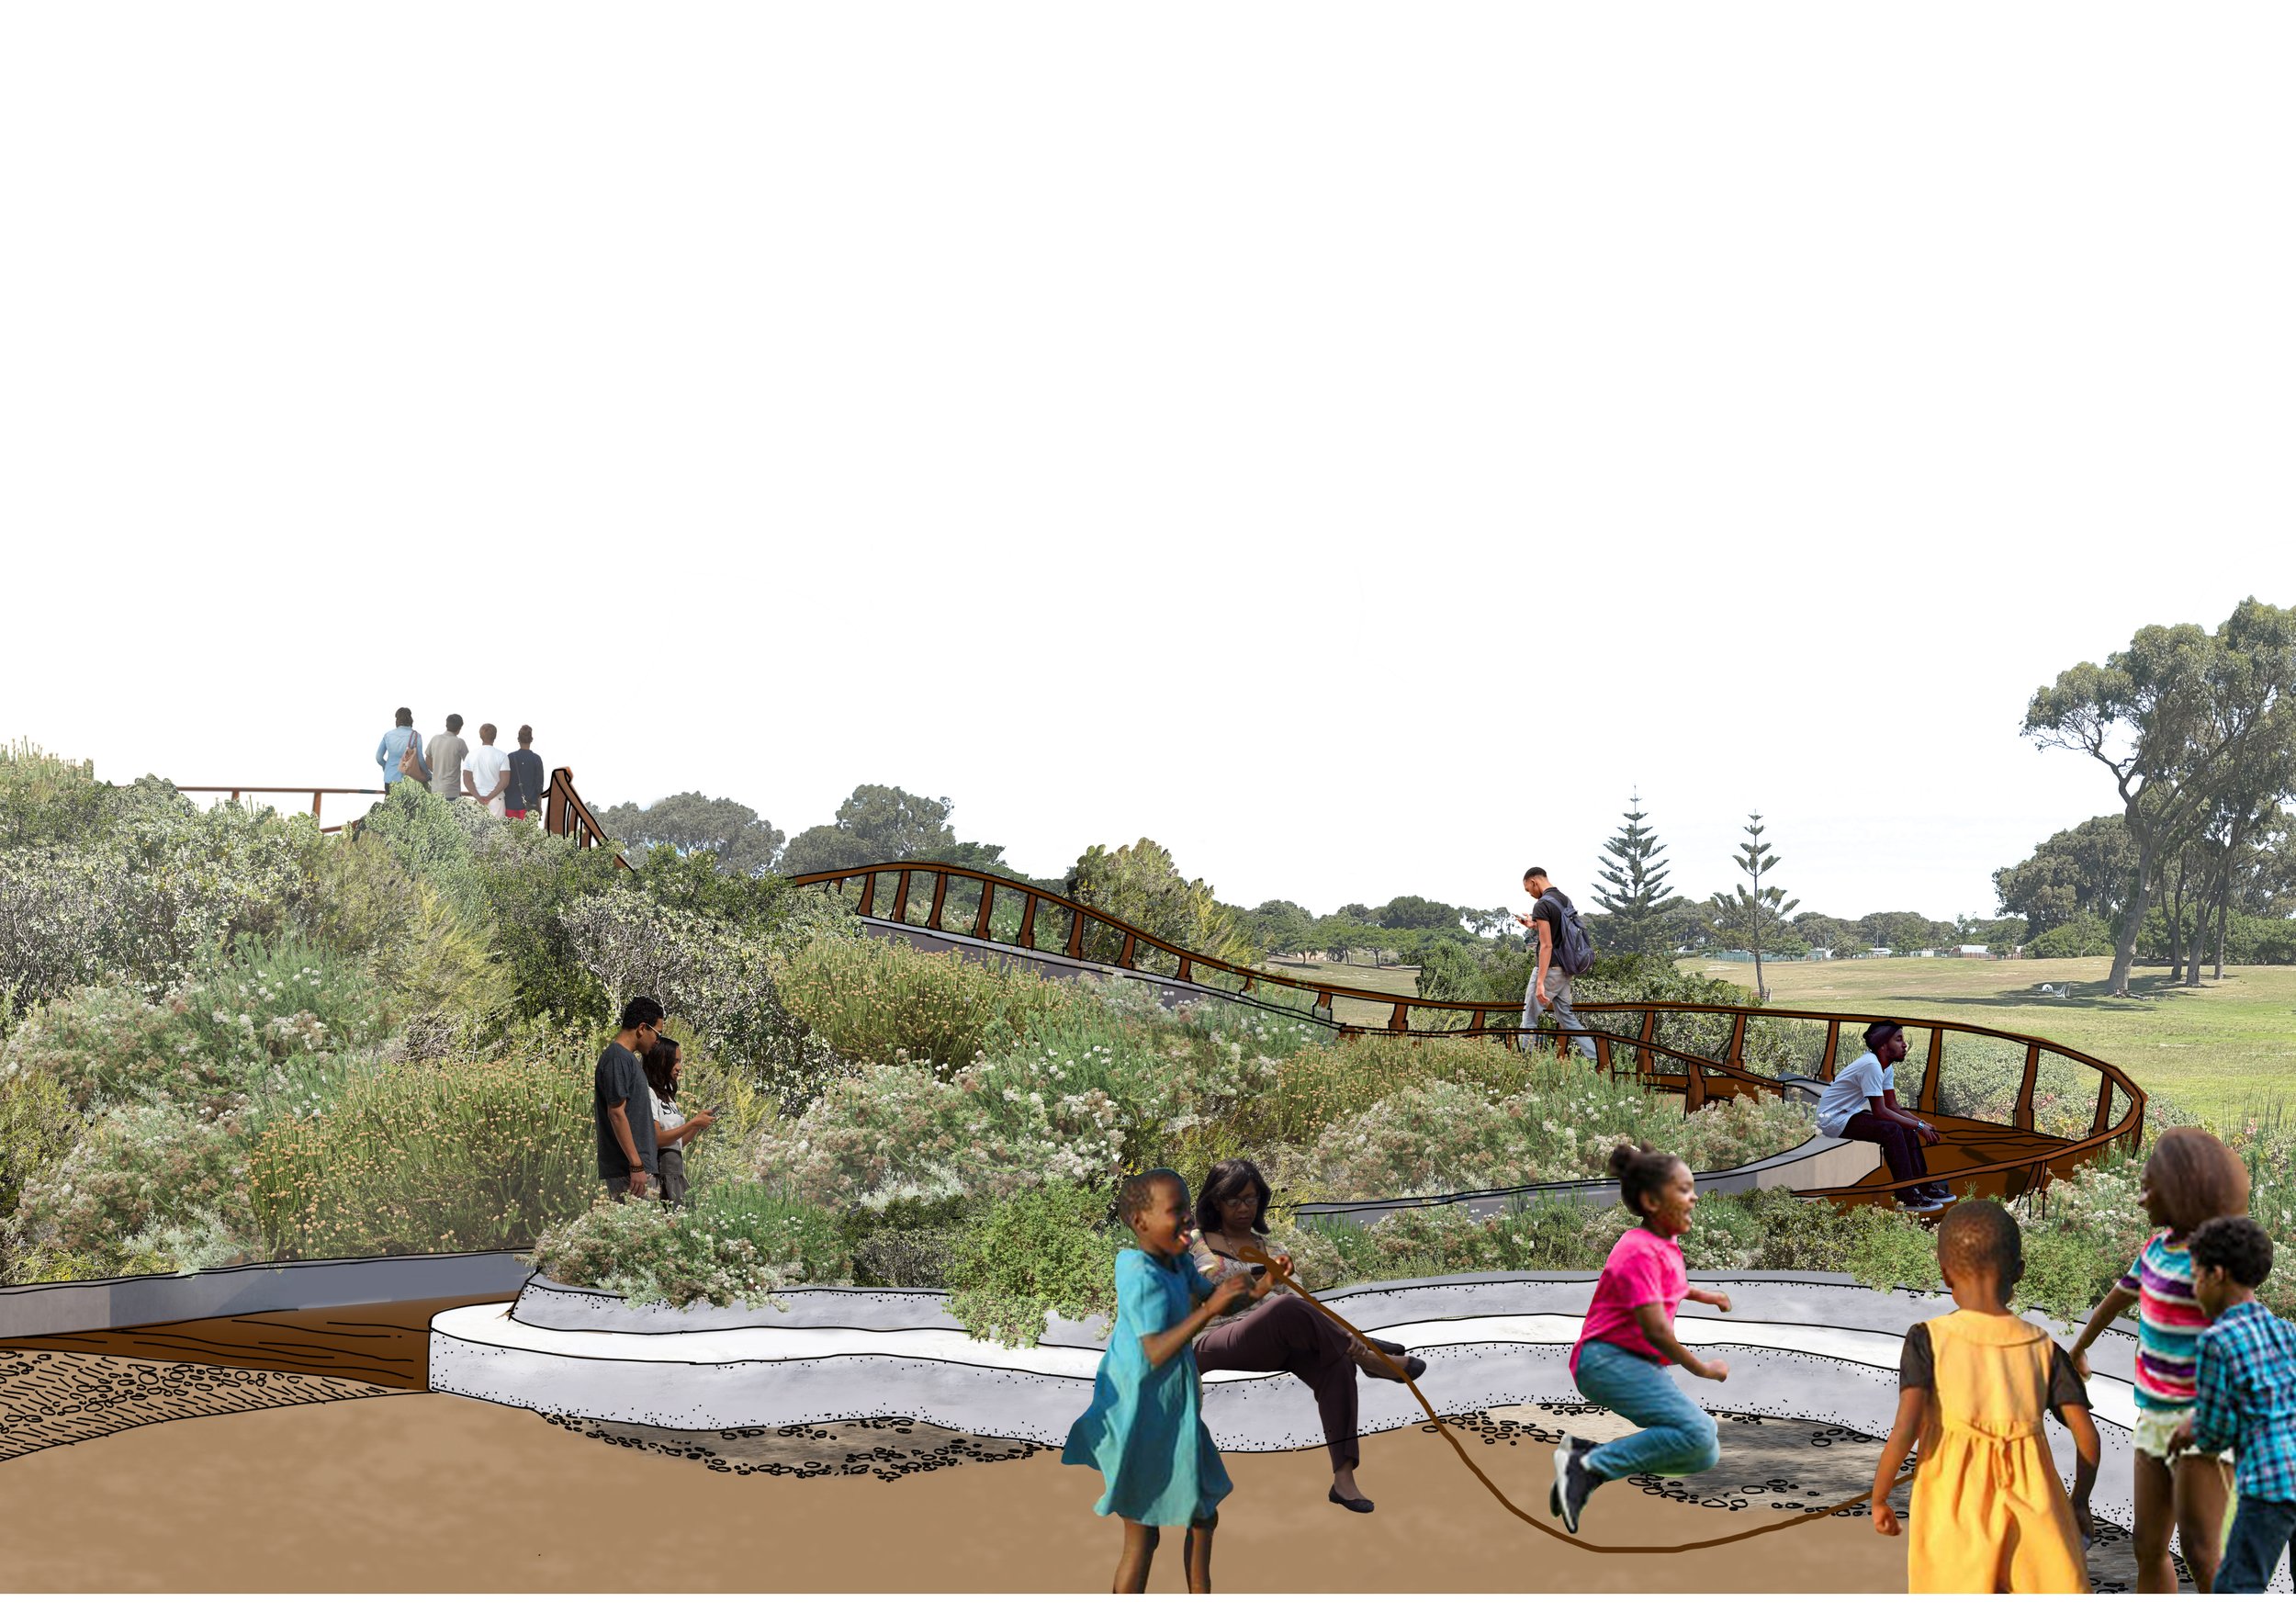  It is important to note that the project is currently in the concept phase. All photographs in this article are taken of the existing boardwalk structure. The Molslang Timber Boardwalk promises to be a distinctive addition to Westridge Park, offerin